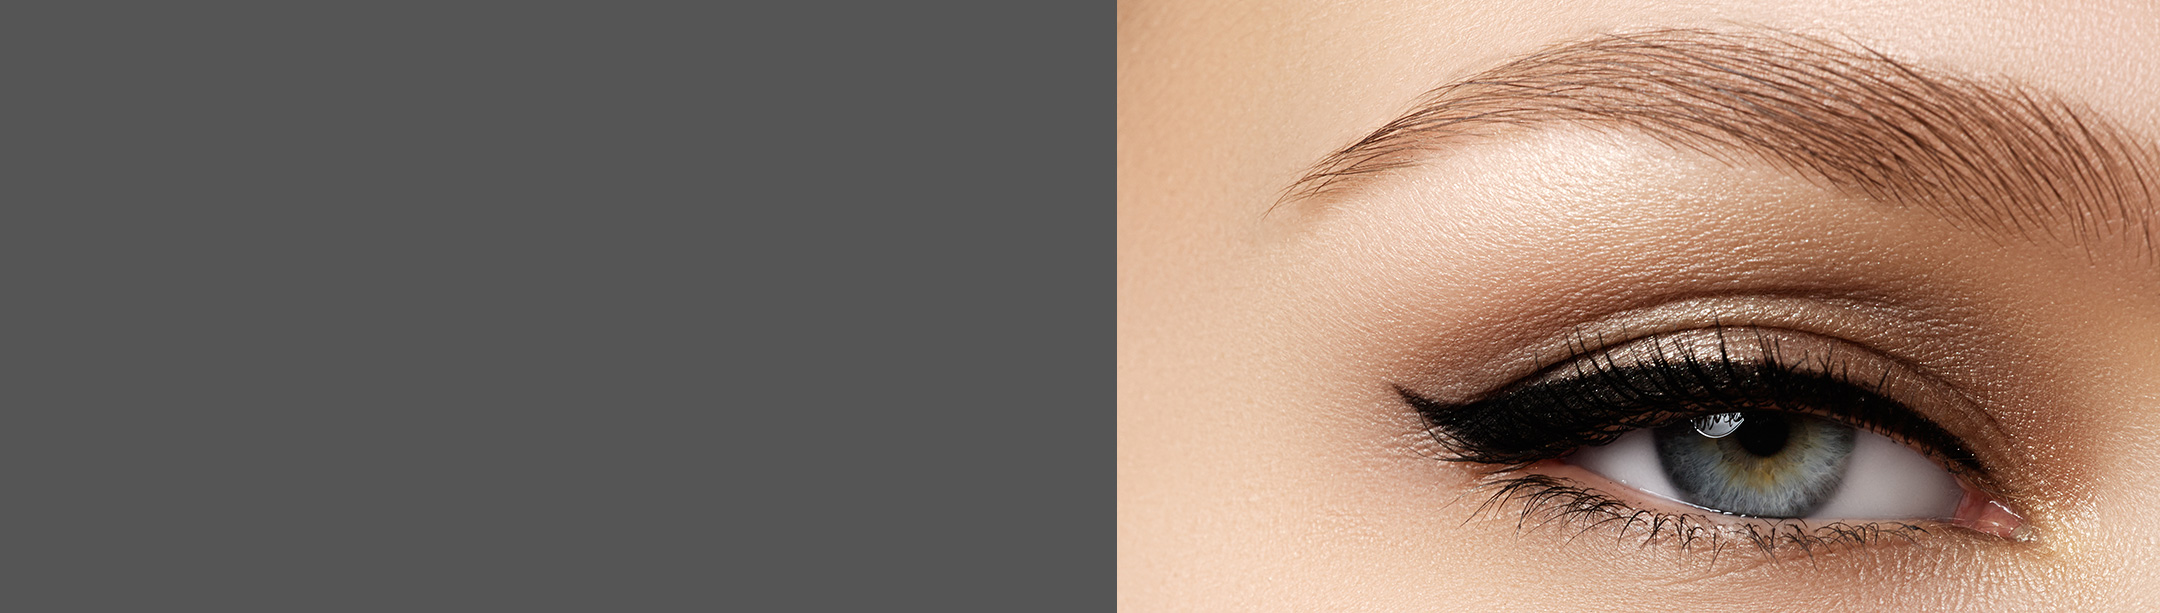 Permanent Cosmetic Design in Boise, ID | Eyelash Extensions